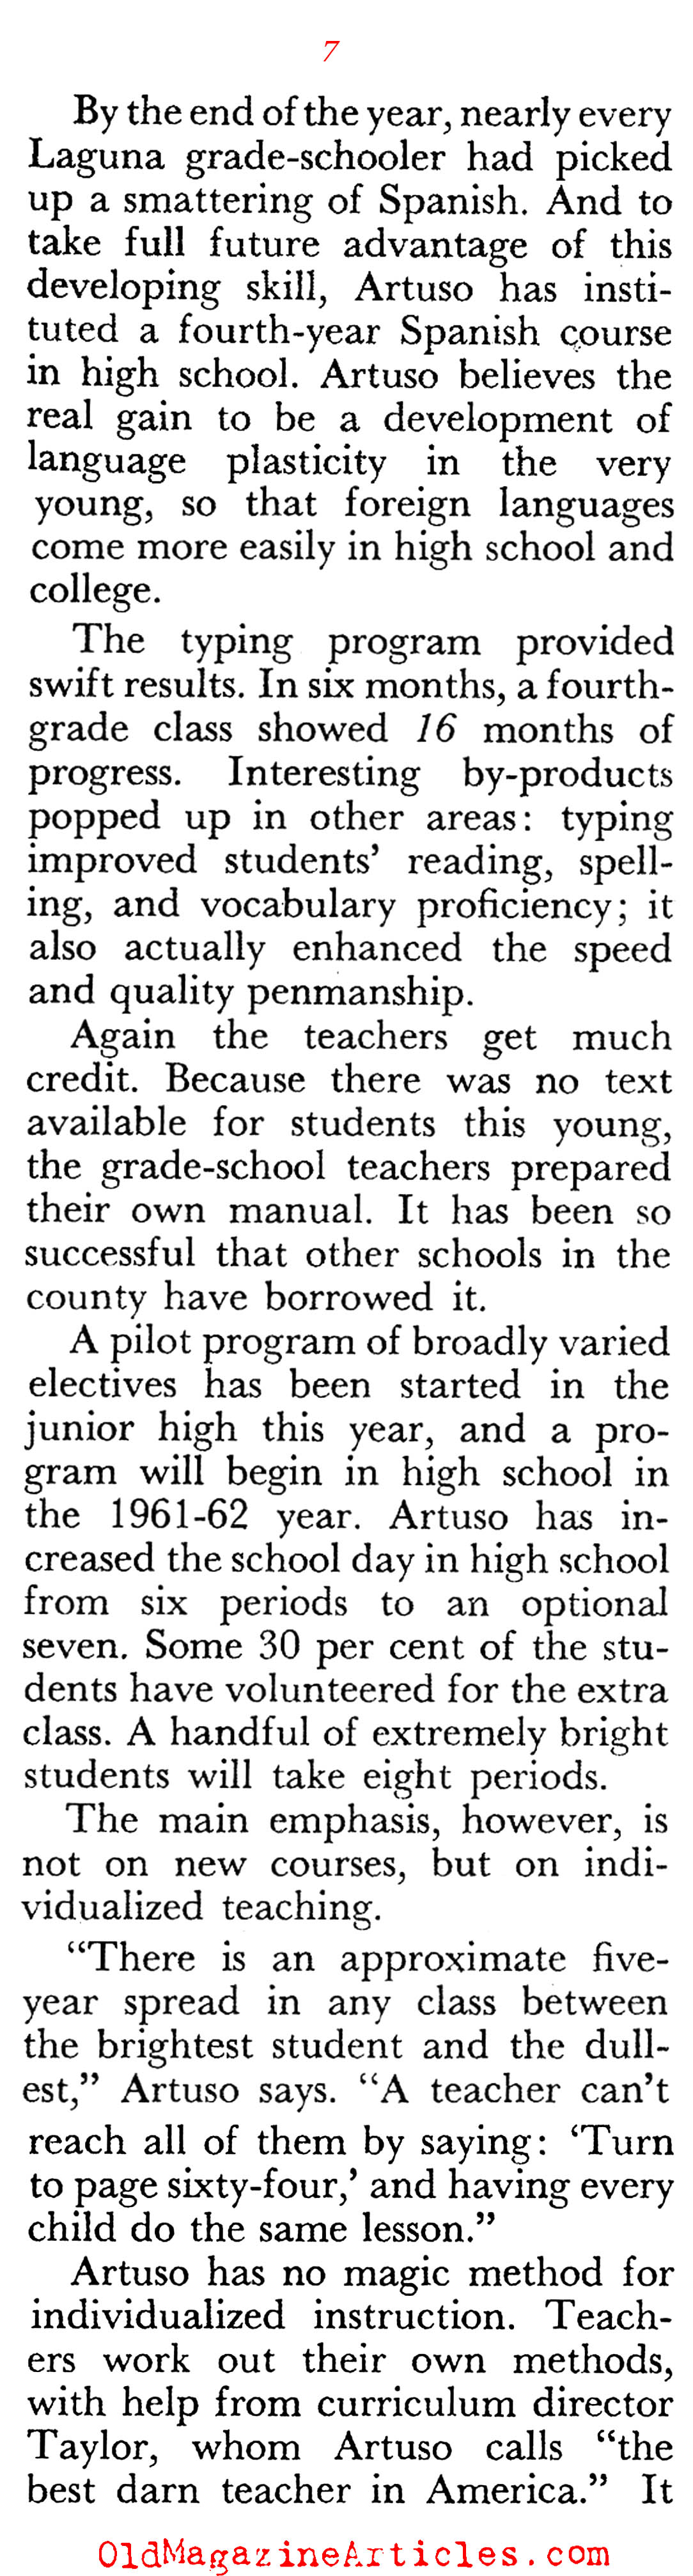 How One School Turned Itself Around (Pageant Magazine, 1961)